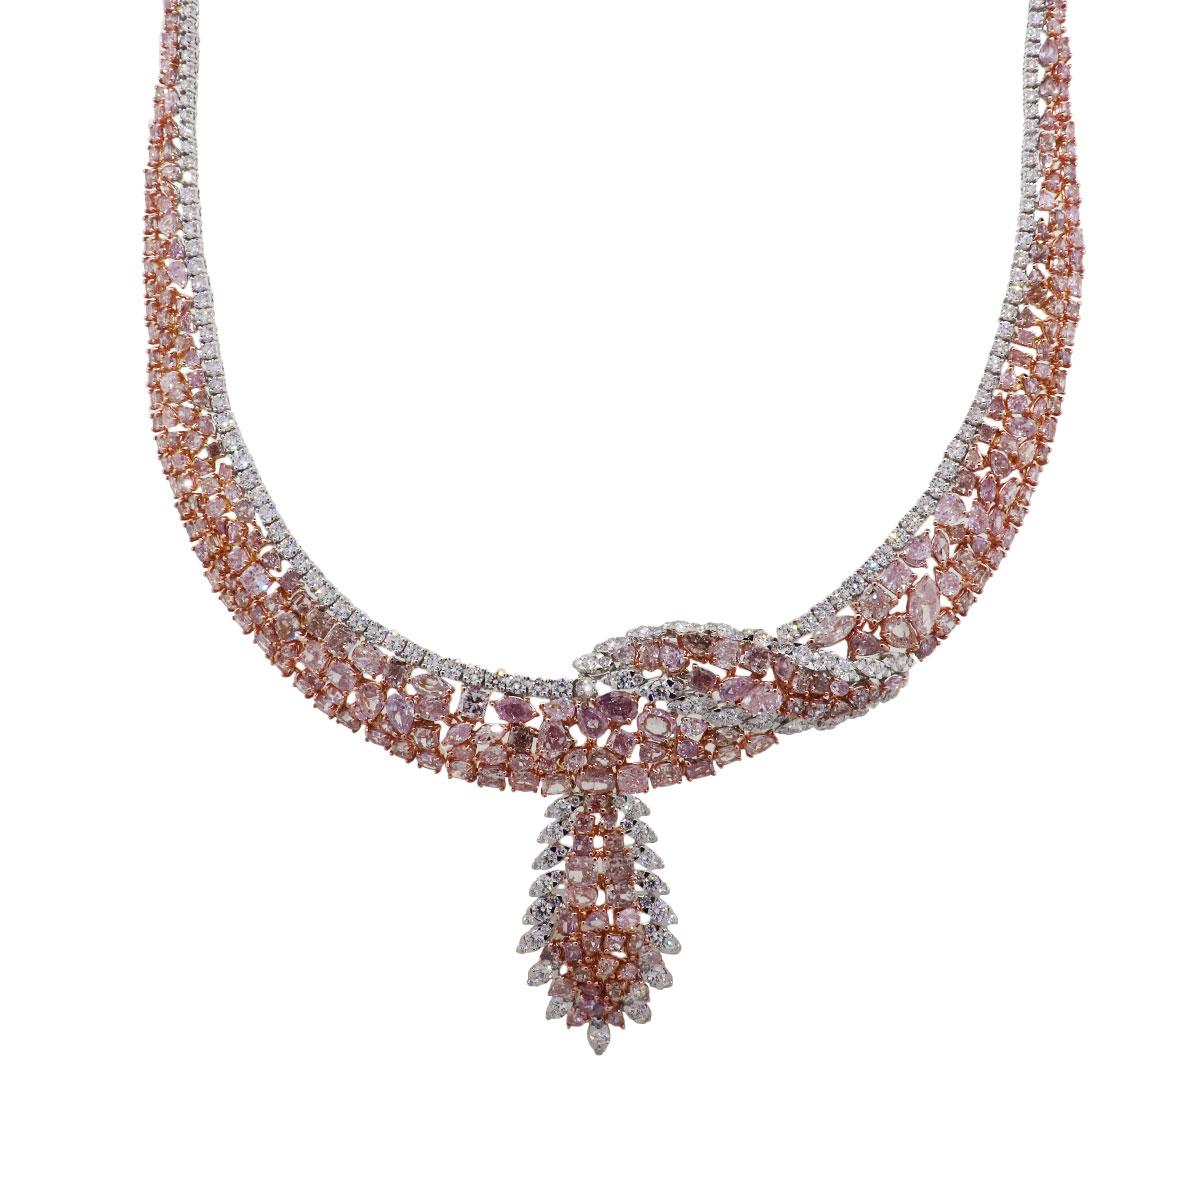 Material: 18k white and rose gold
Diamond Details: Approximately 9.69ctw of round brilliant white diamonds and approximately 41.42ctw of multi shape natural pink diamonds
Measurements: Necklace measures 16.75″ in length.
Fastening: Tongue in box